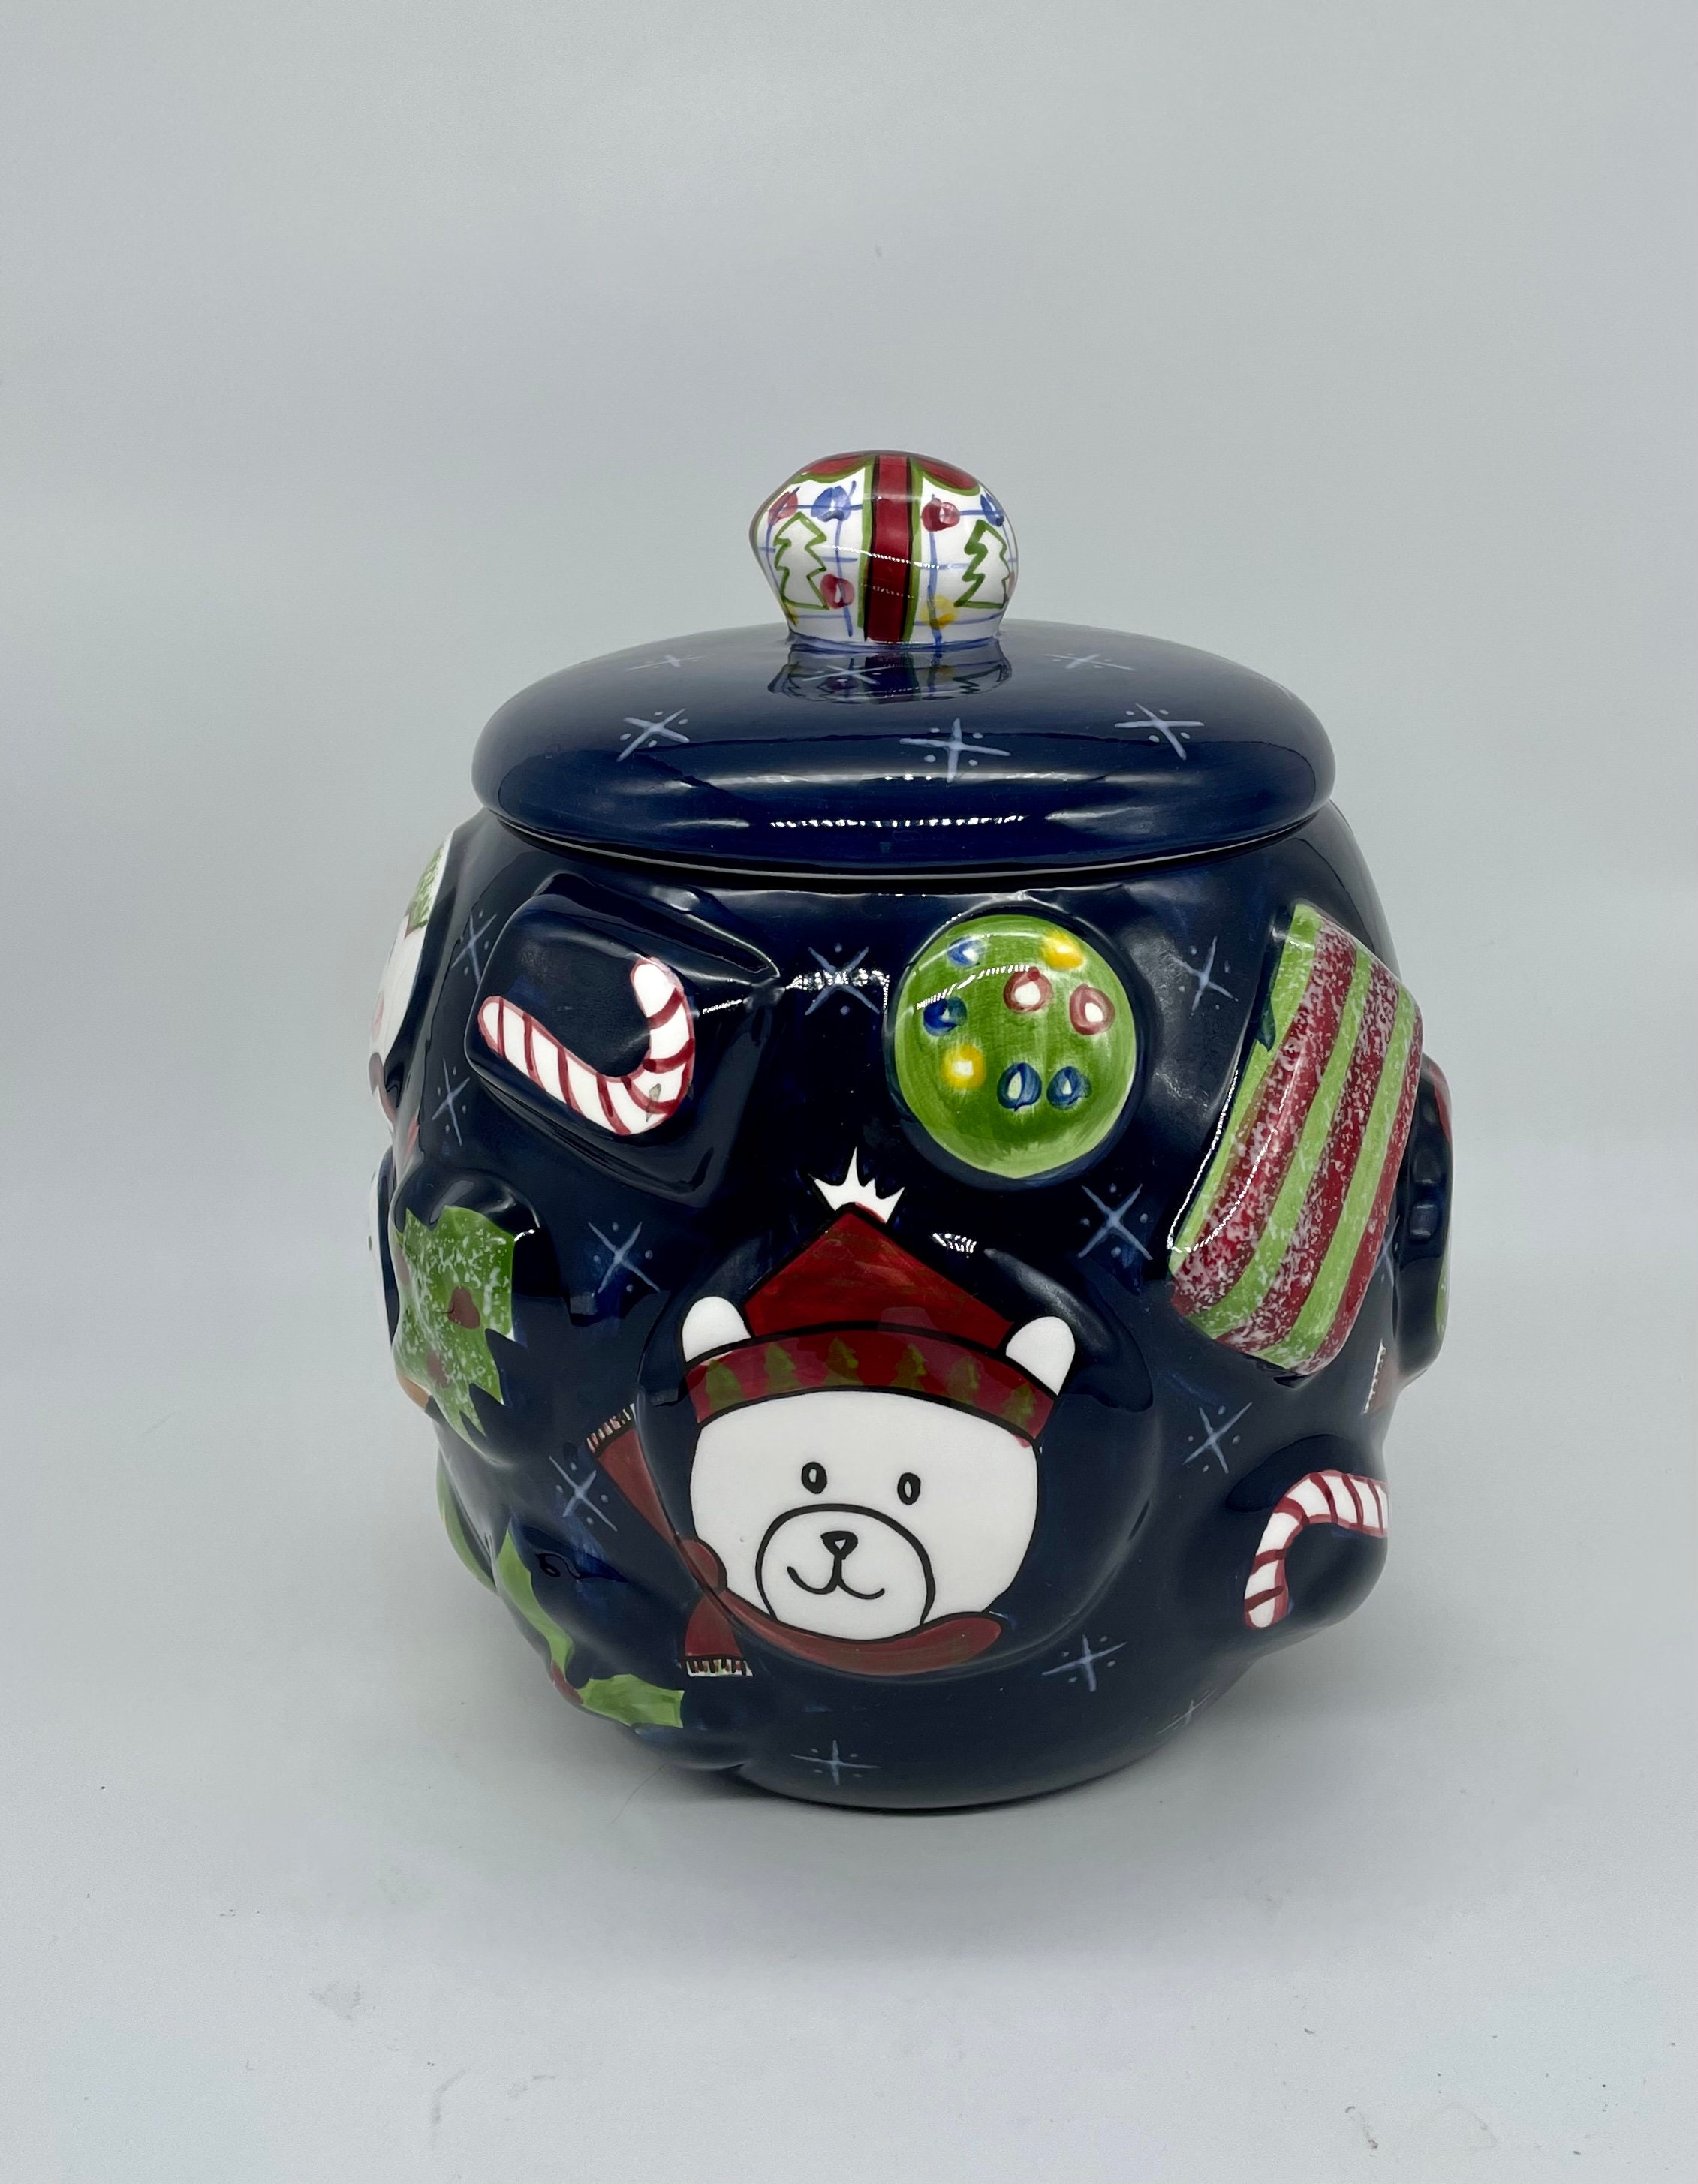 42 Unique Cookie Jars That You Won't Be Able To Keep Your Hands Out Of